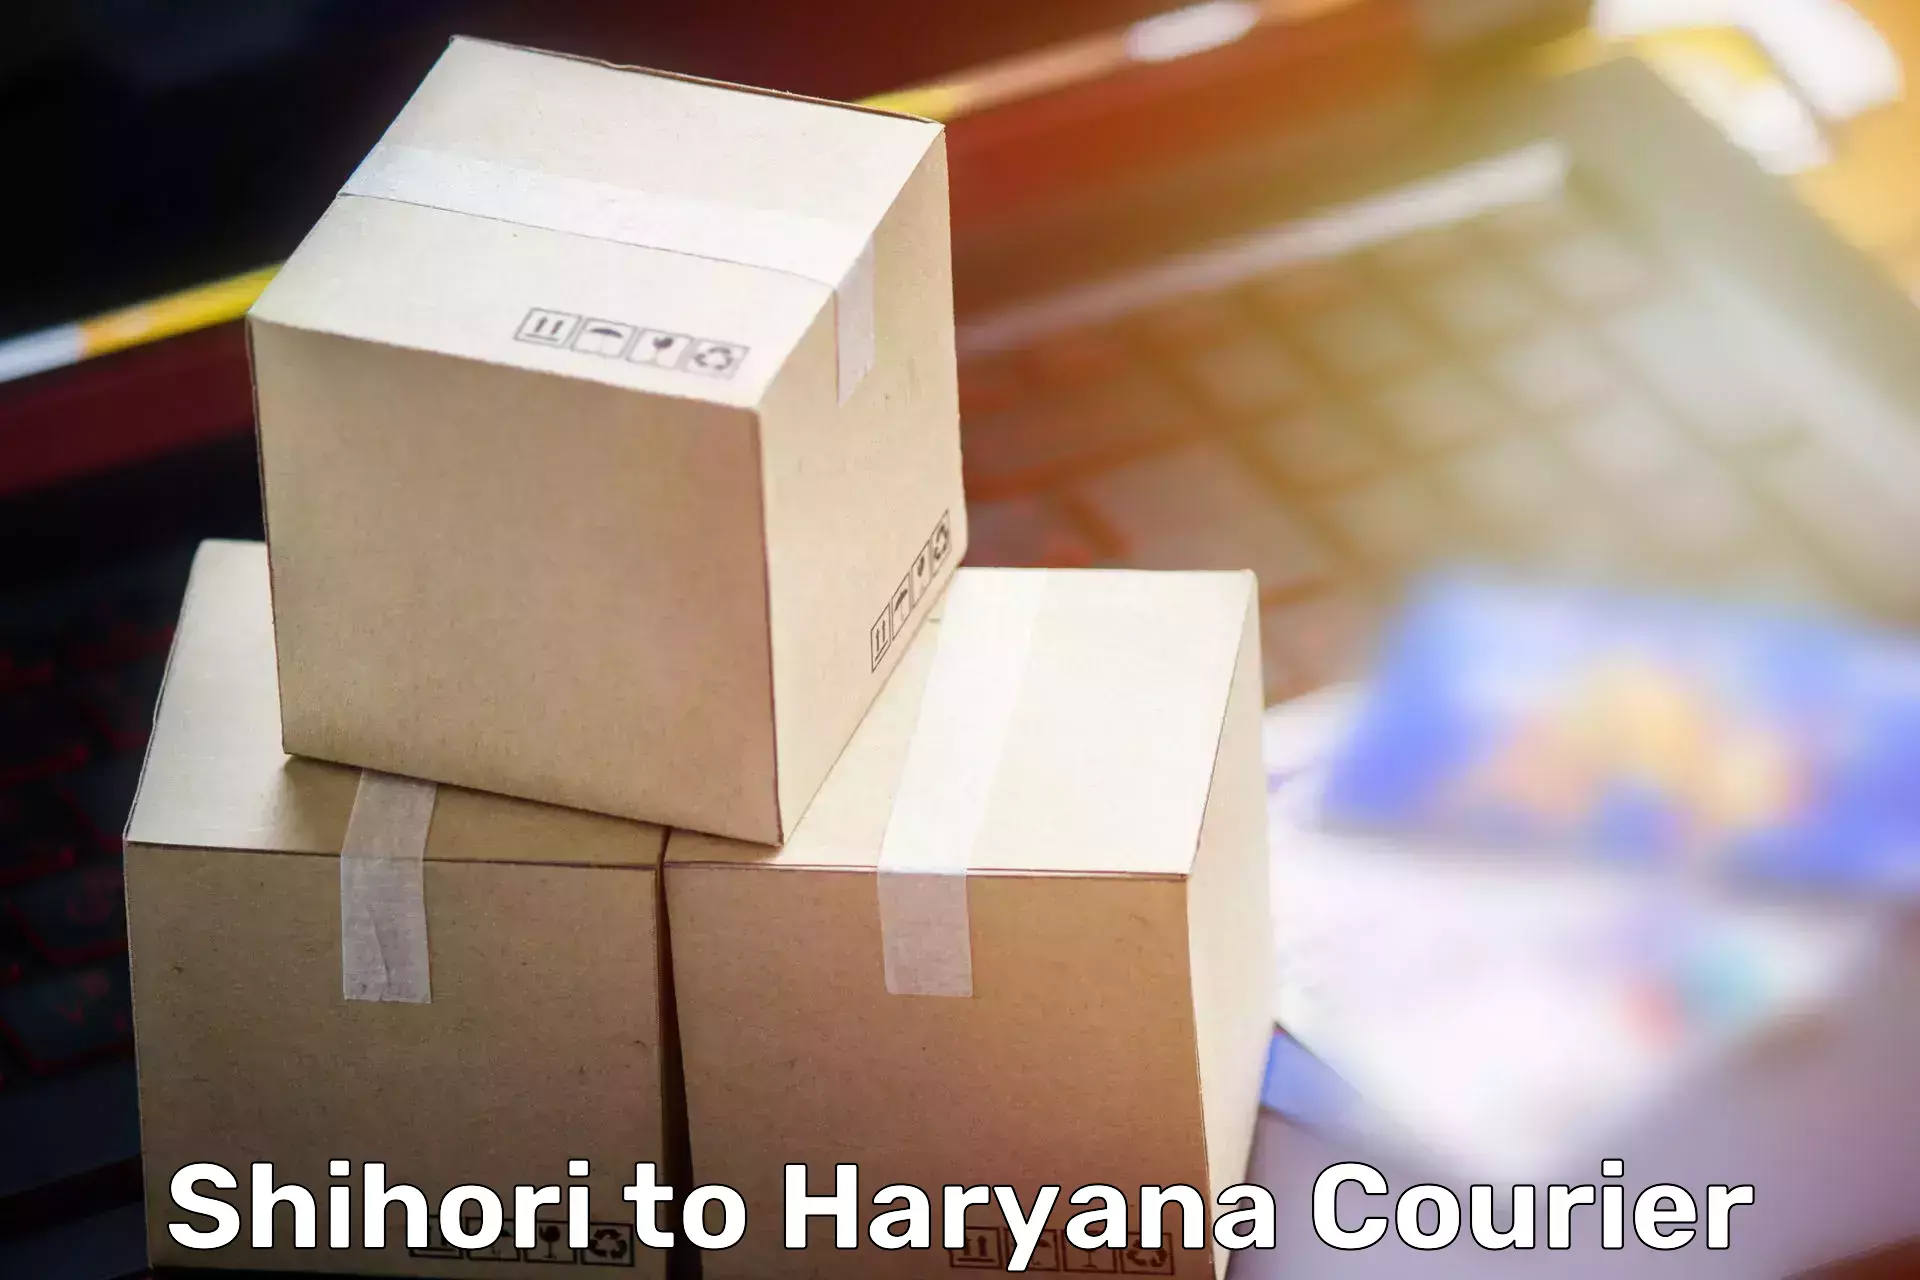 Furniture delivery service Shihori to NCR Haryana